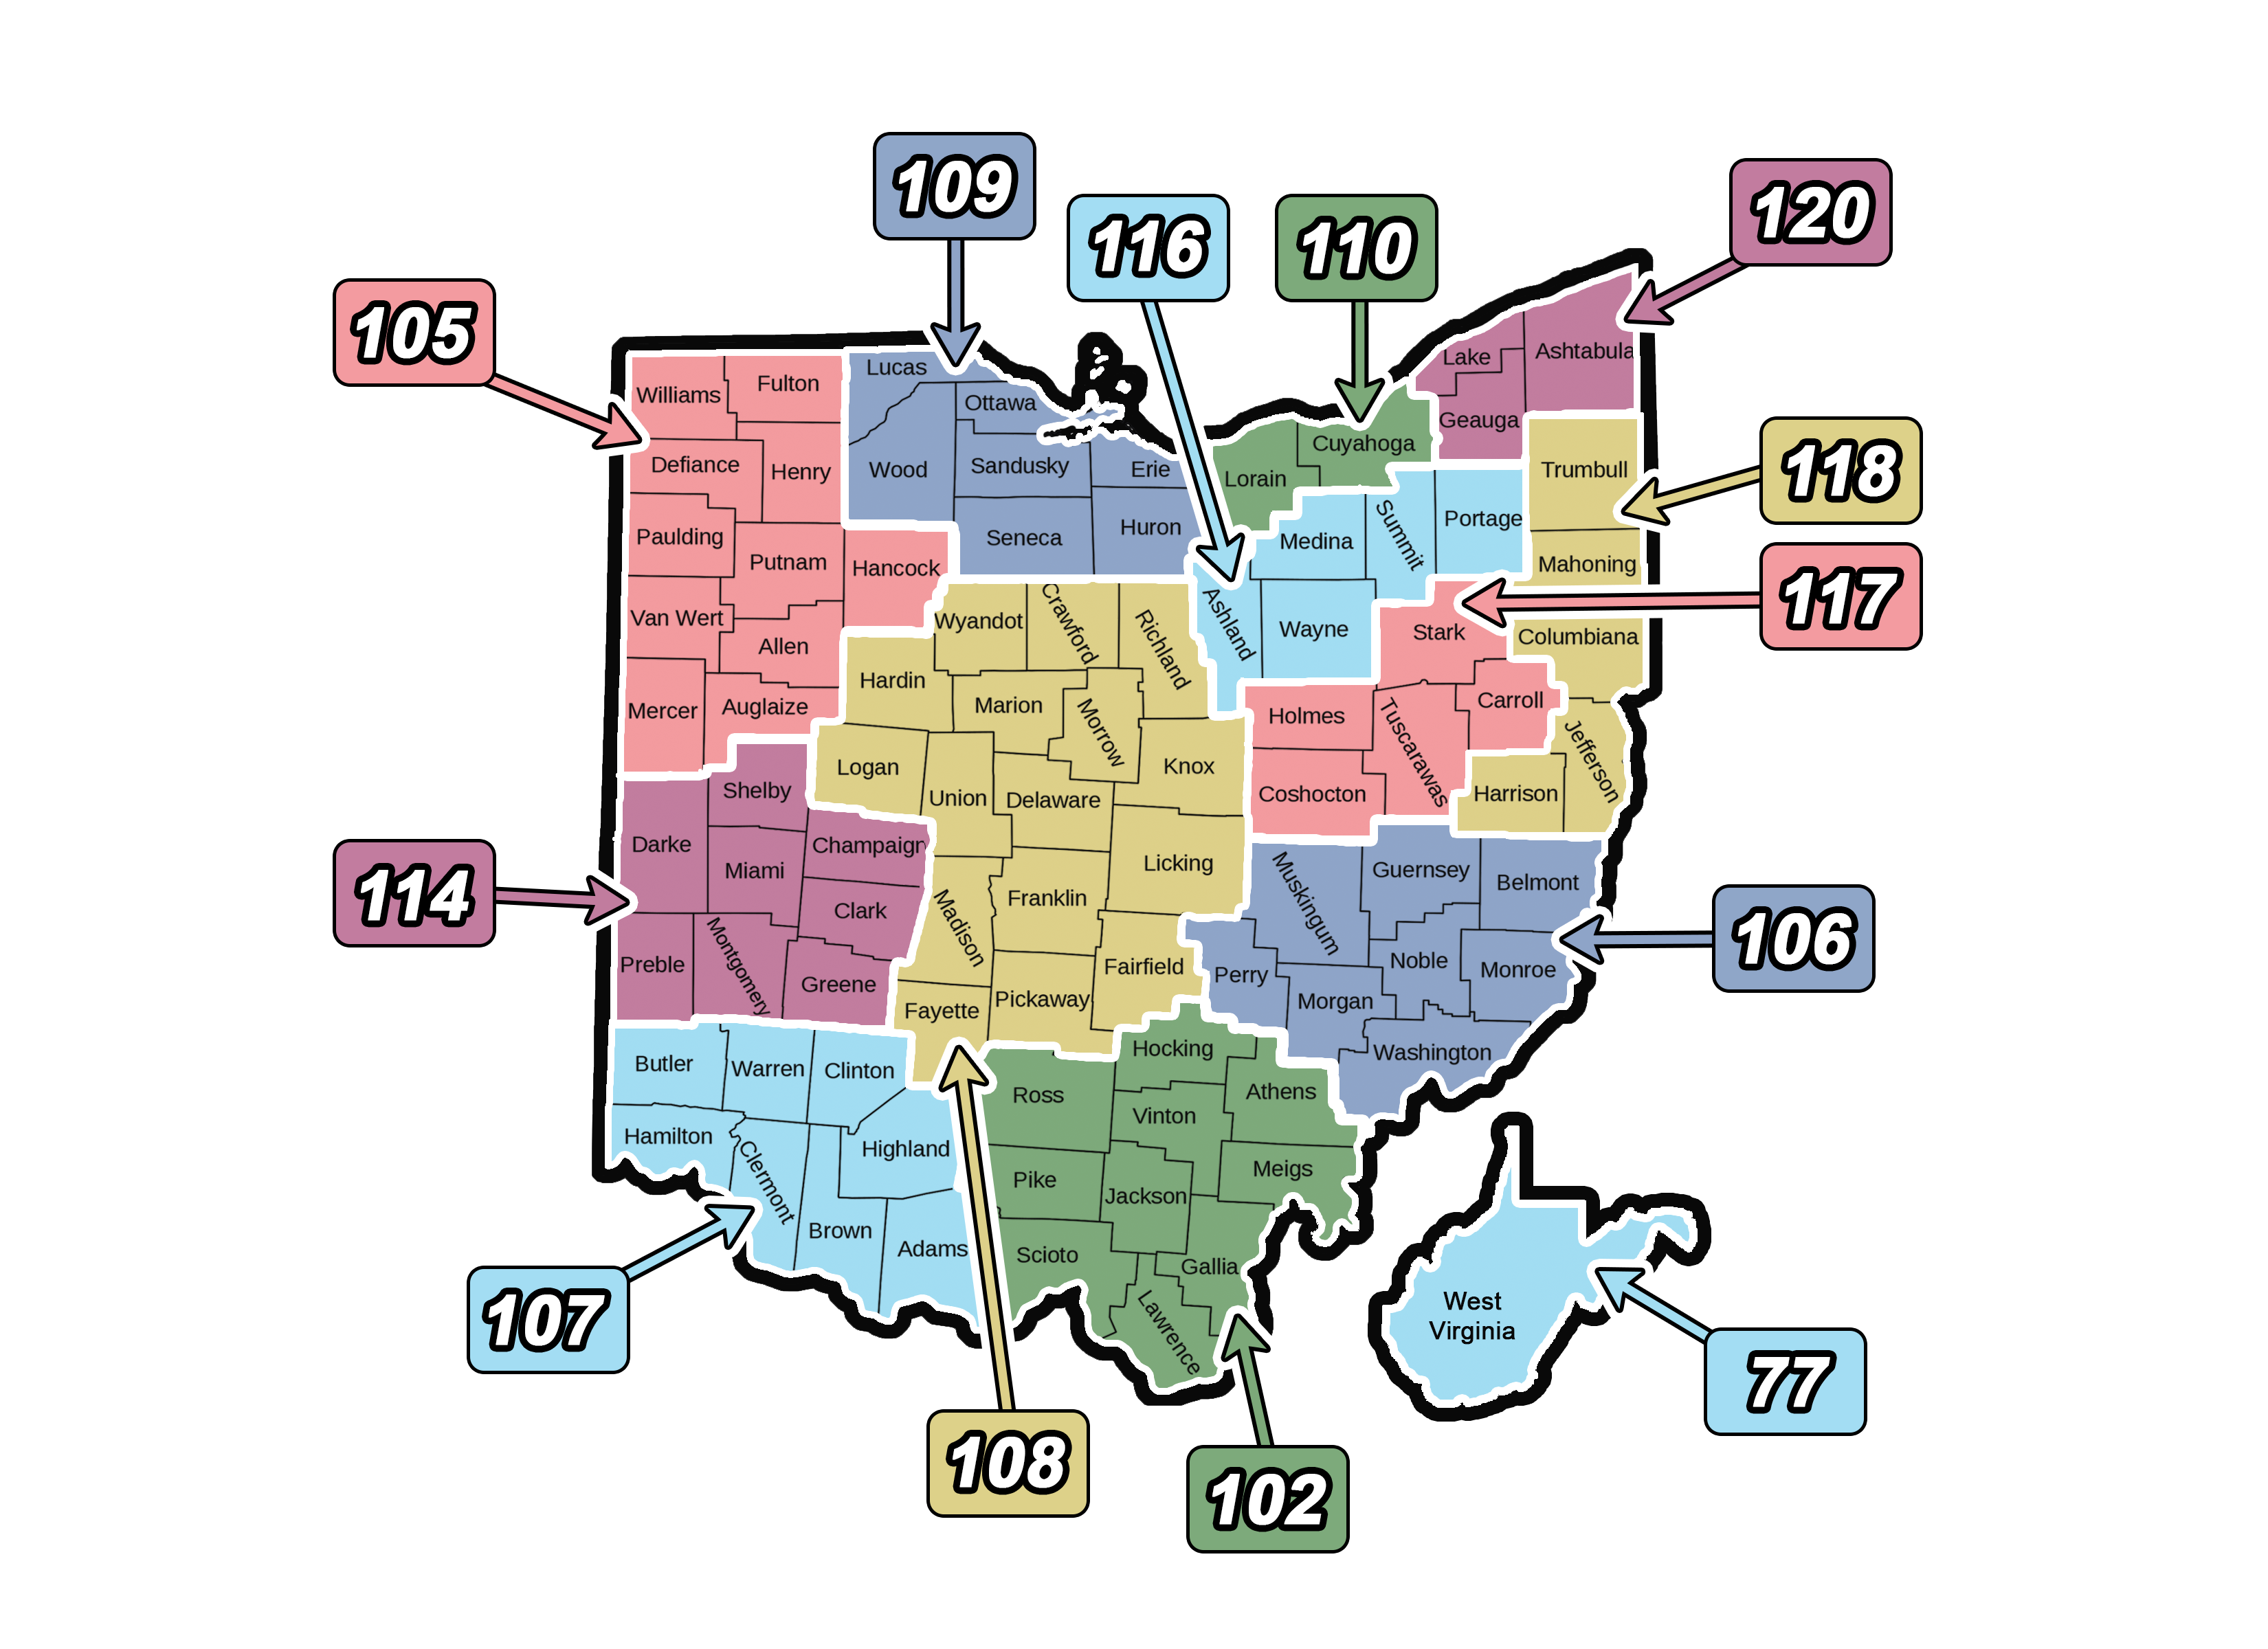 A map of Chapter 1184's subchapters by county.